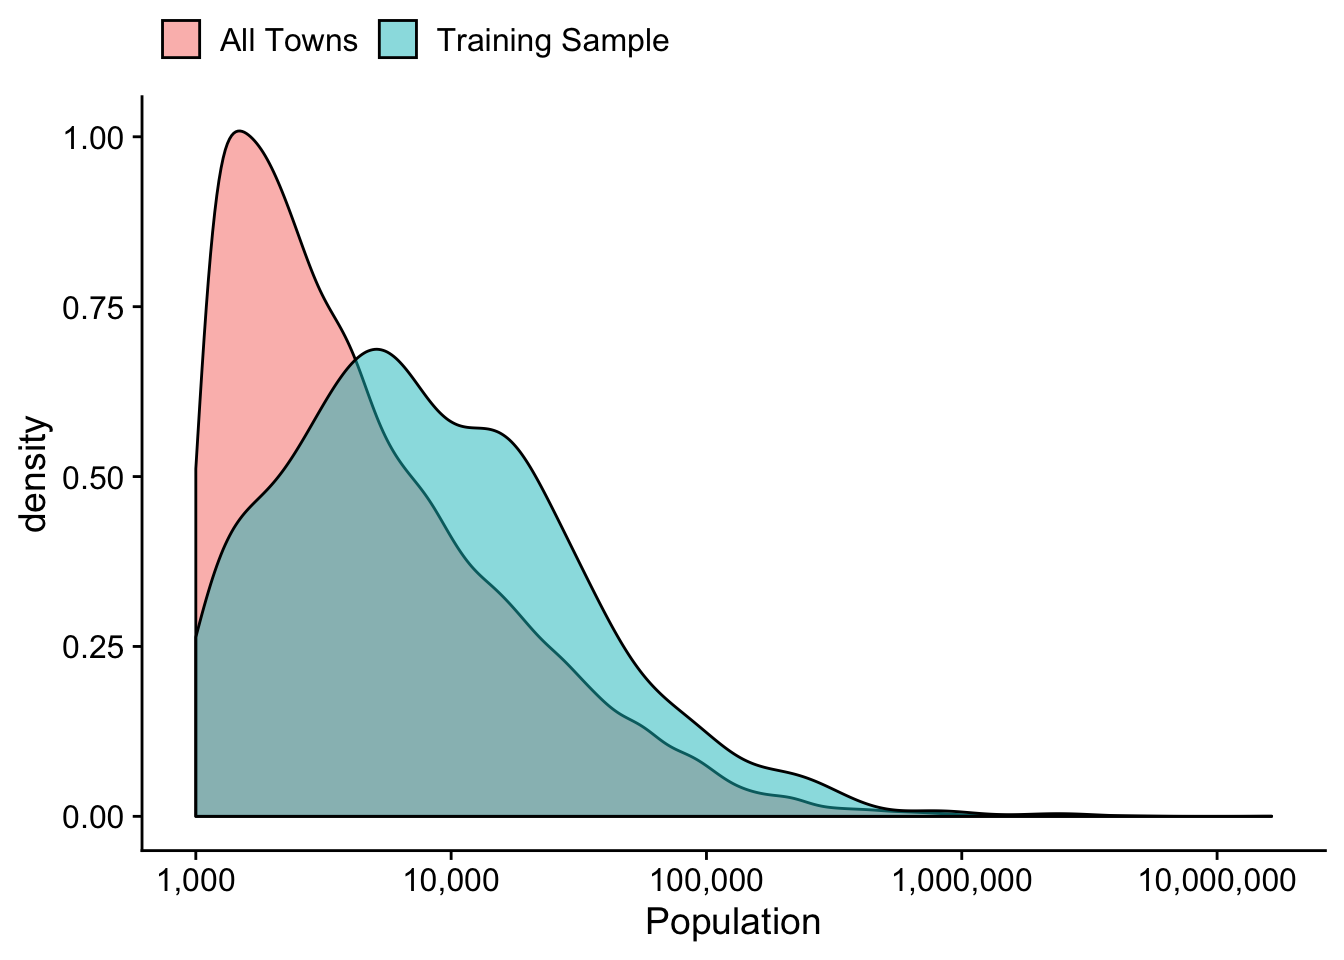 Distribution of Town Population in Training Sample and All US Towns with population greather than 1000.